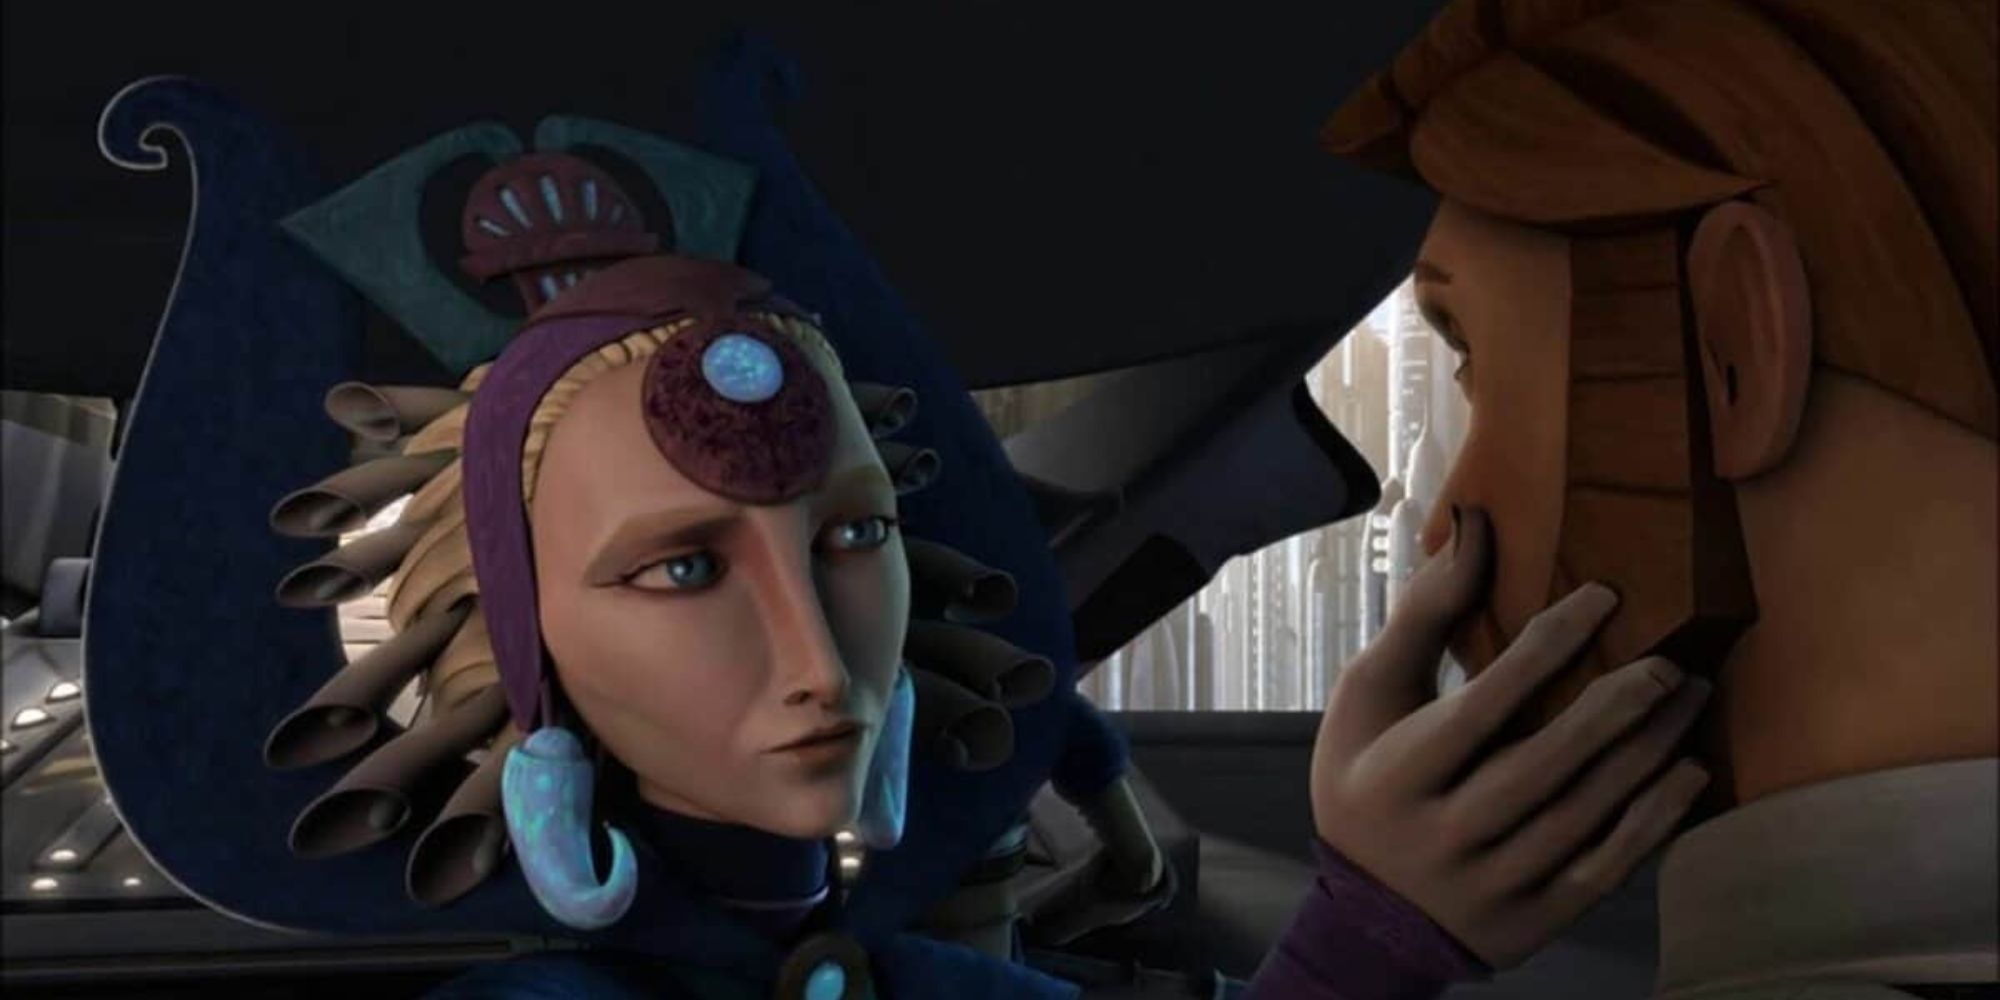 Star Wars The Clone Wars animated TV show to be re-rendered in 4K